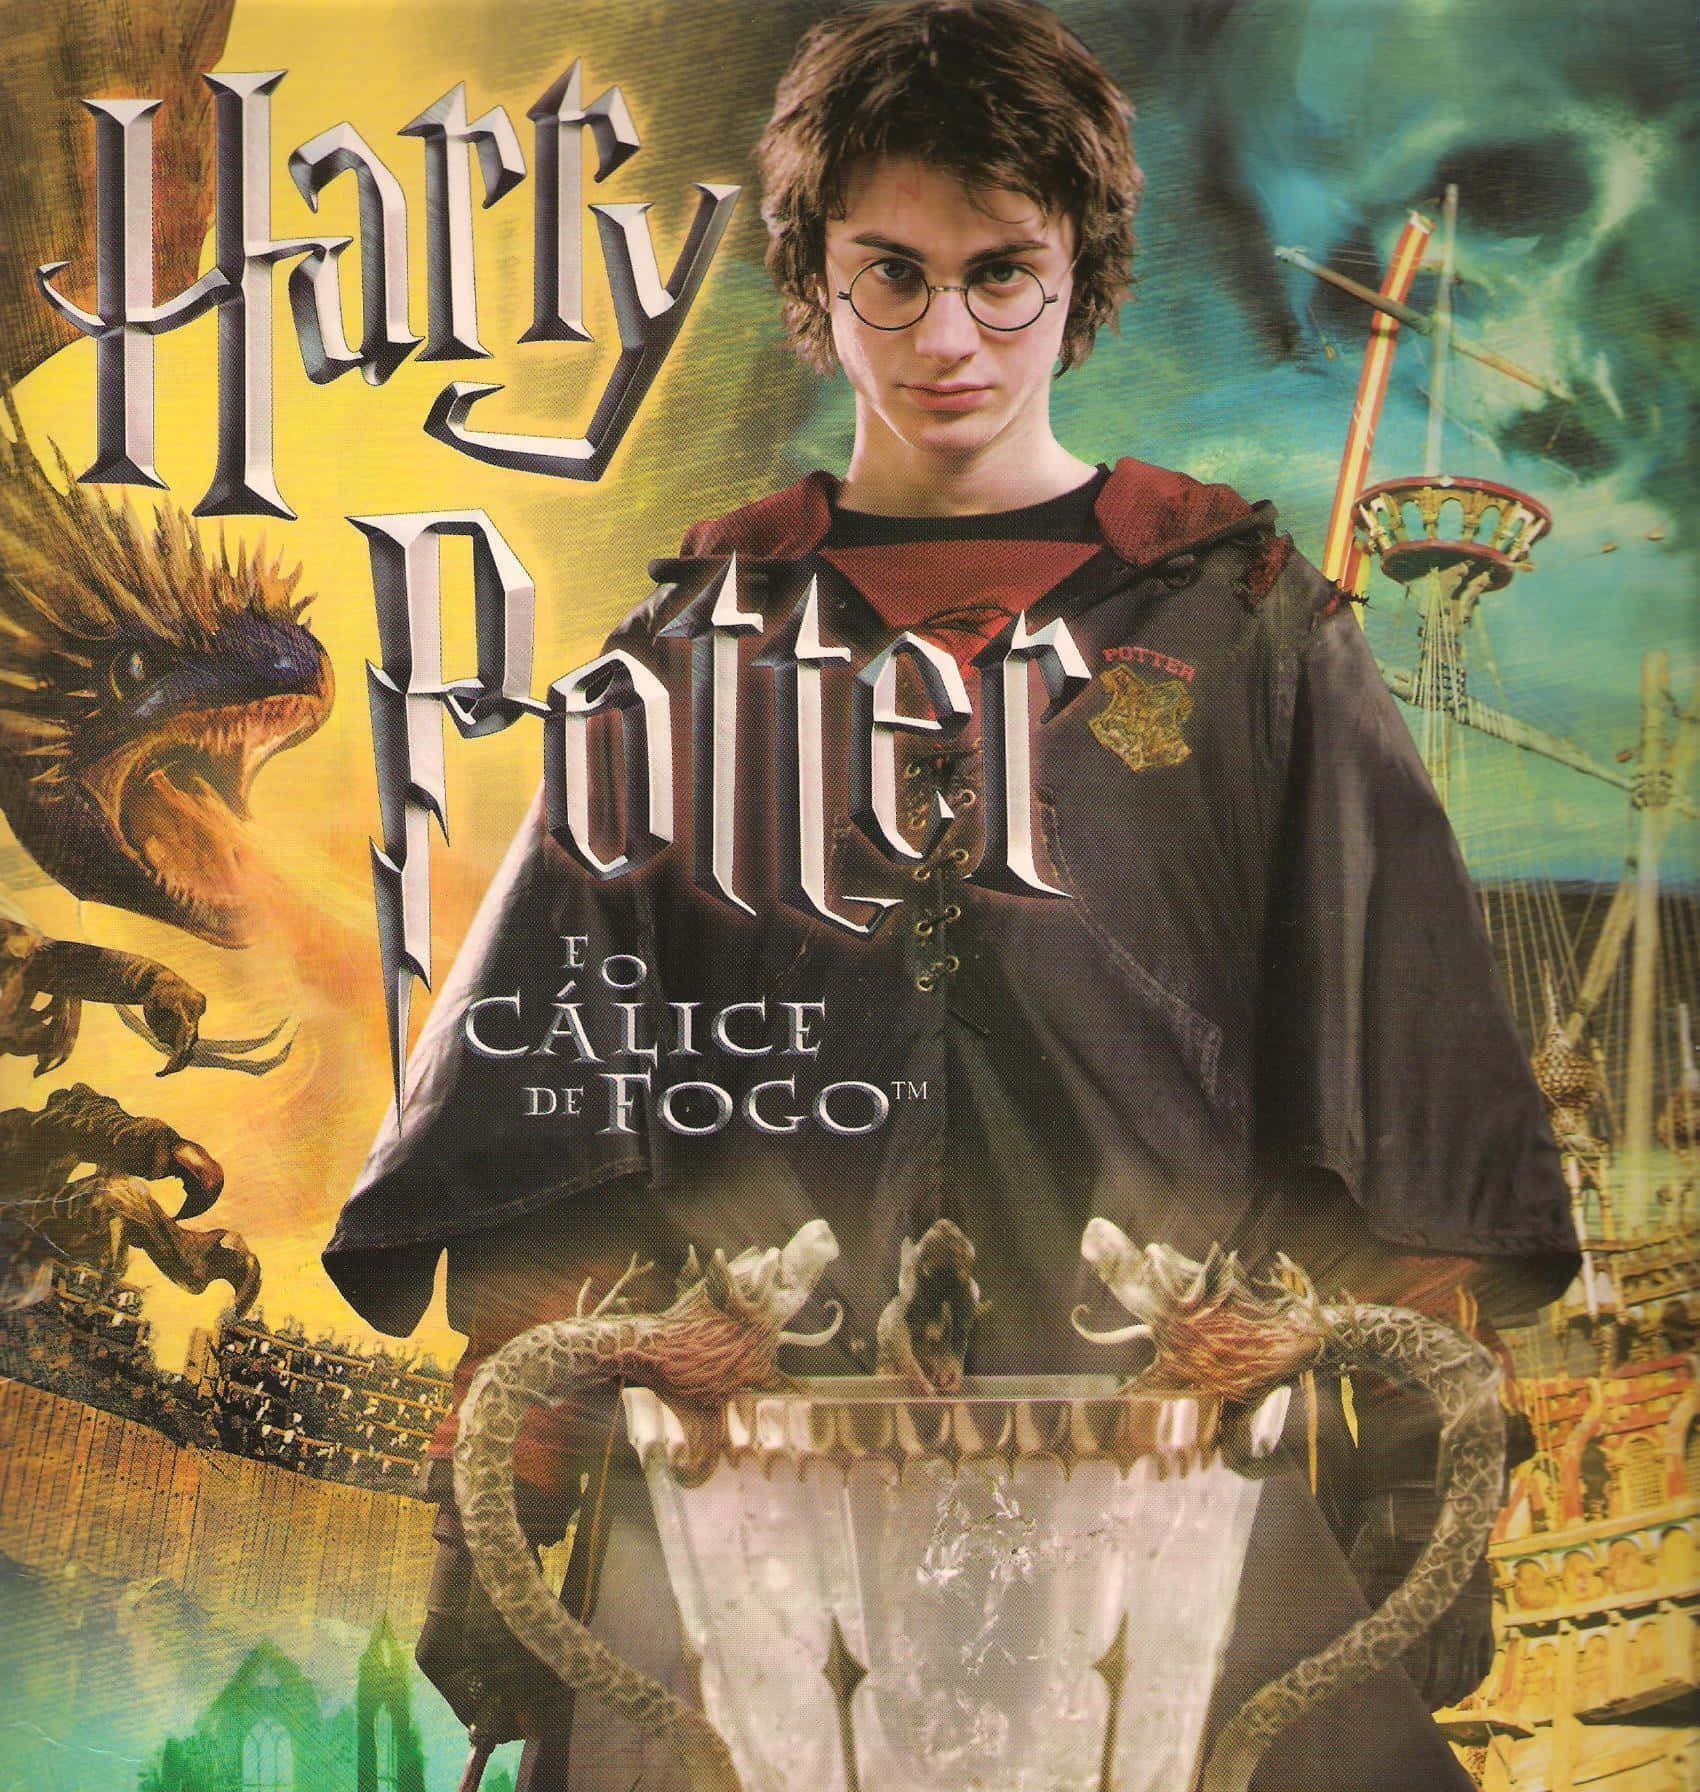 The Goblet Of Fire, the fourth installment of the Harry Potter book series Wallpaper